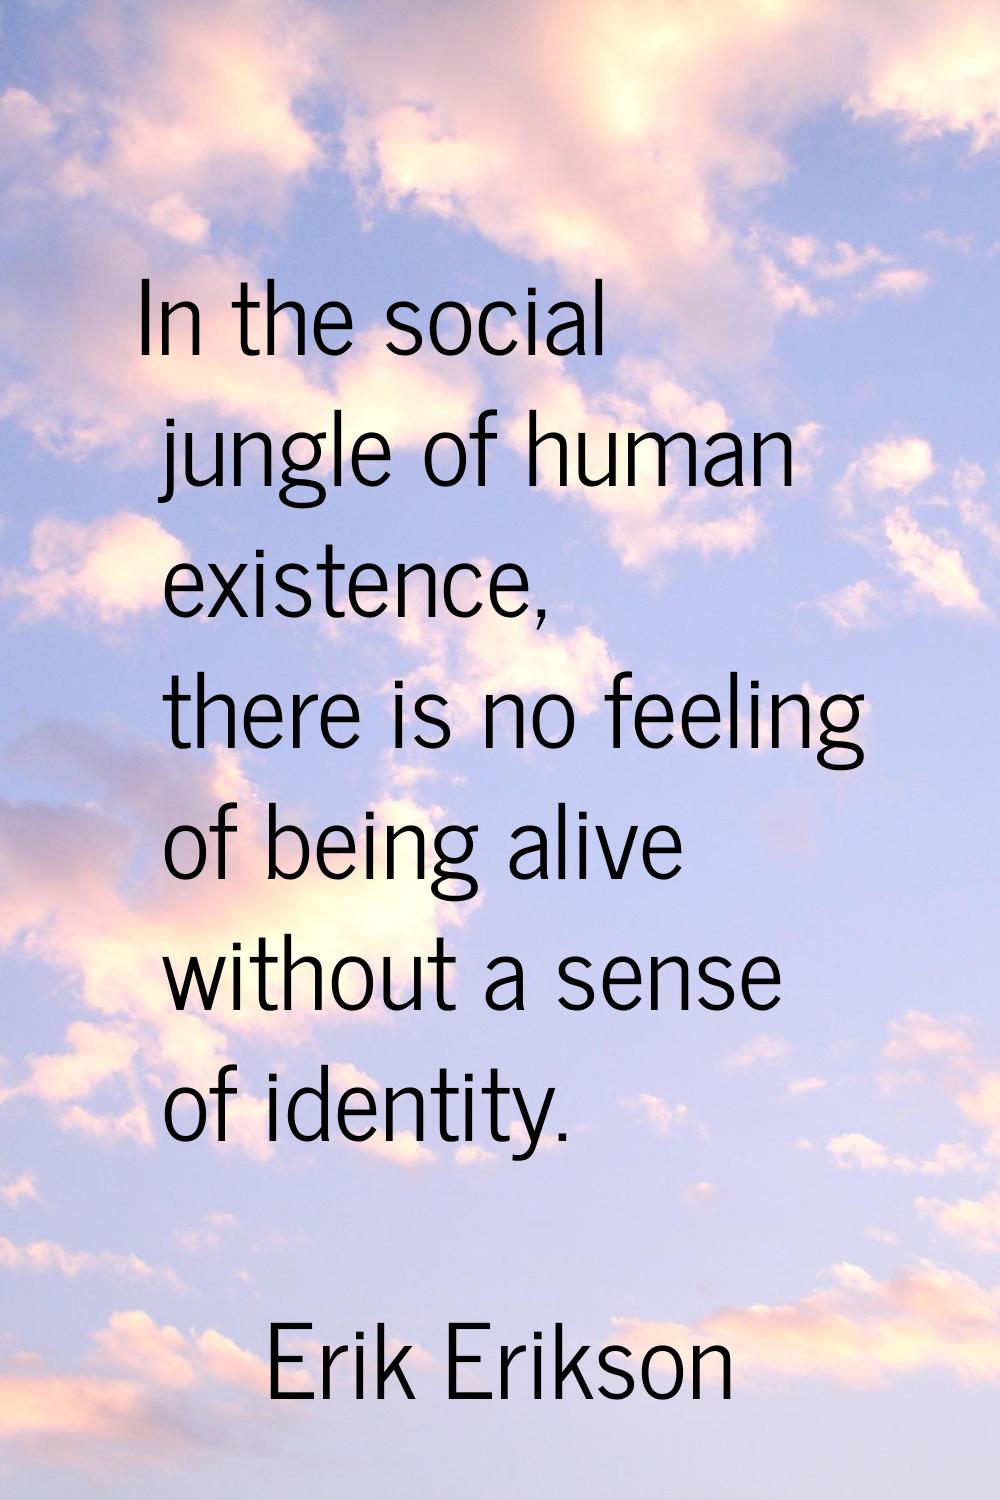 In the social jungle of human existence, there is no feeling of being alive without a sense of iden